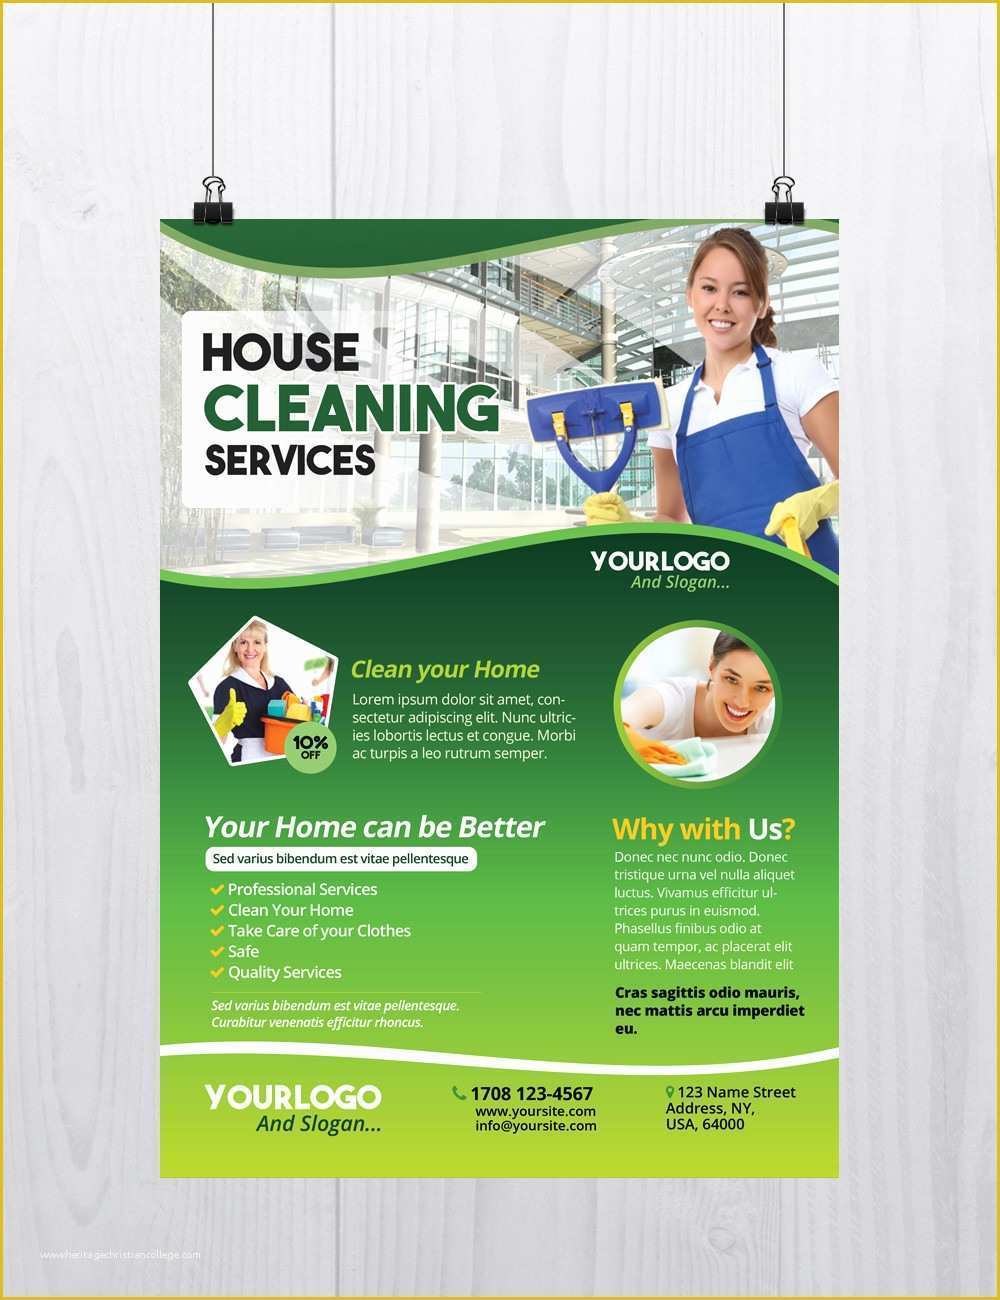 Cleaning Flyers Templates Free Of Cleaning Services Download Free Psd Flyer Template